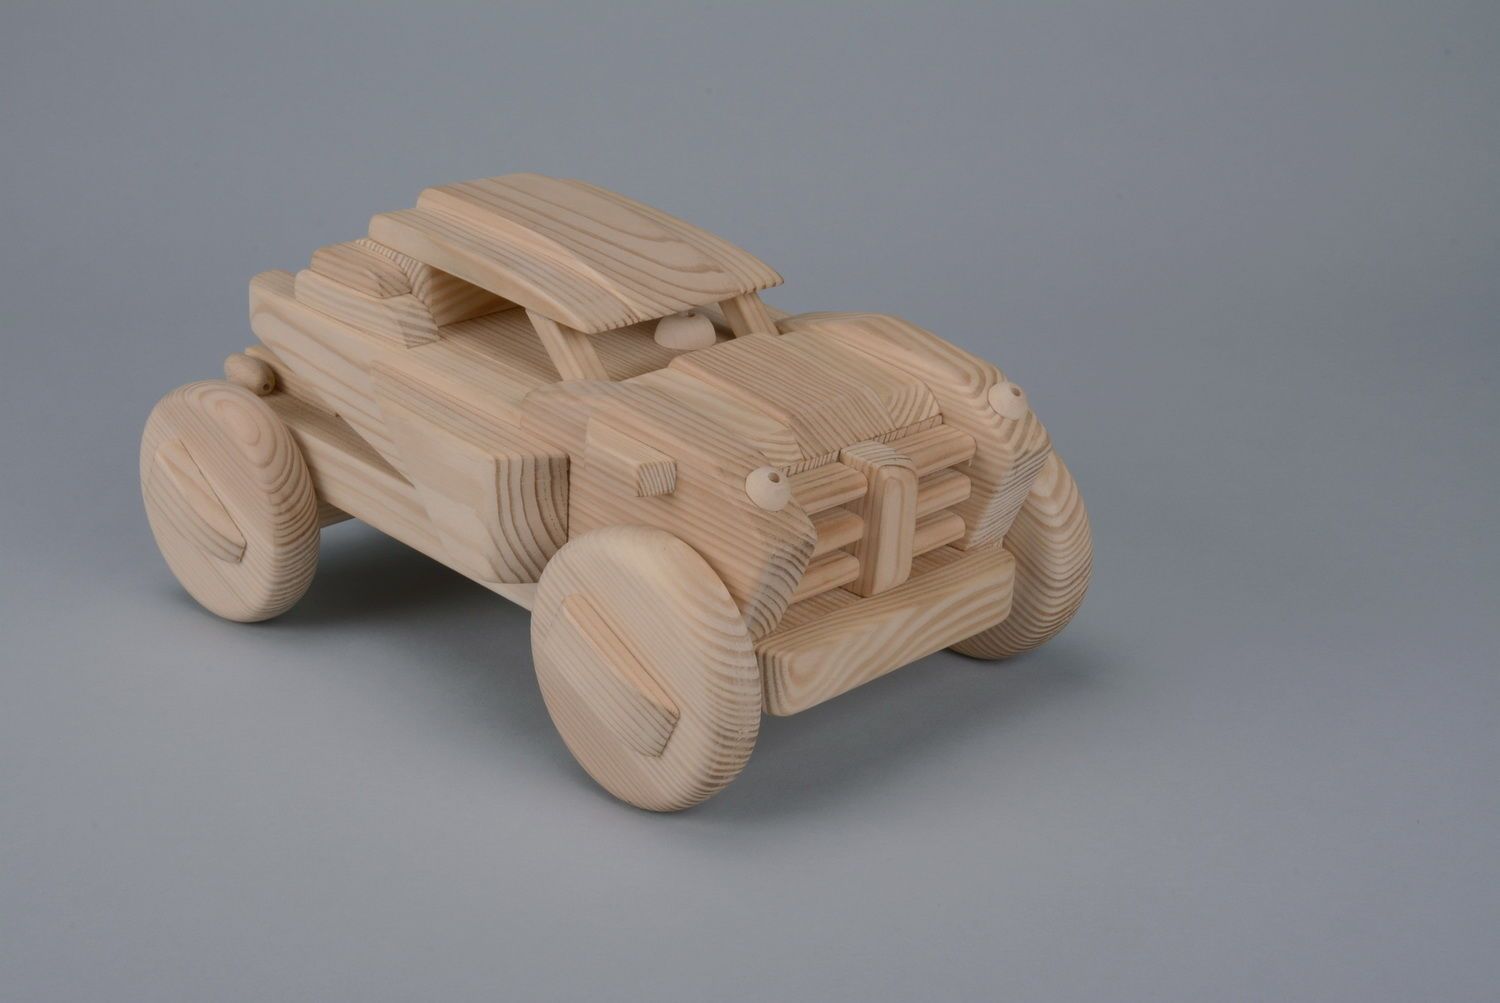 Little car made of wood photo 2